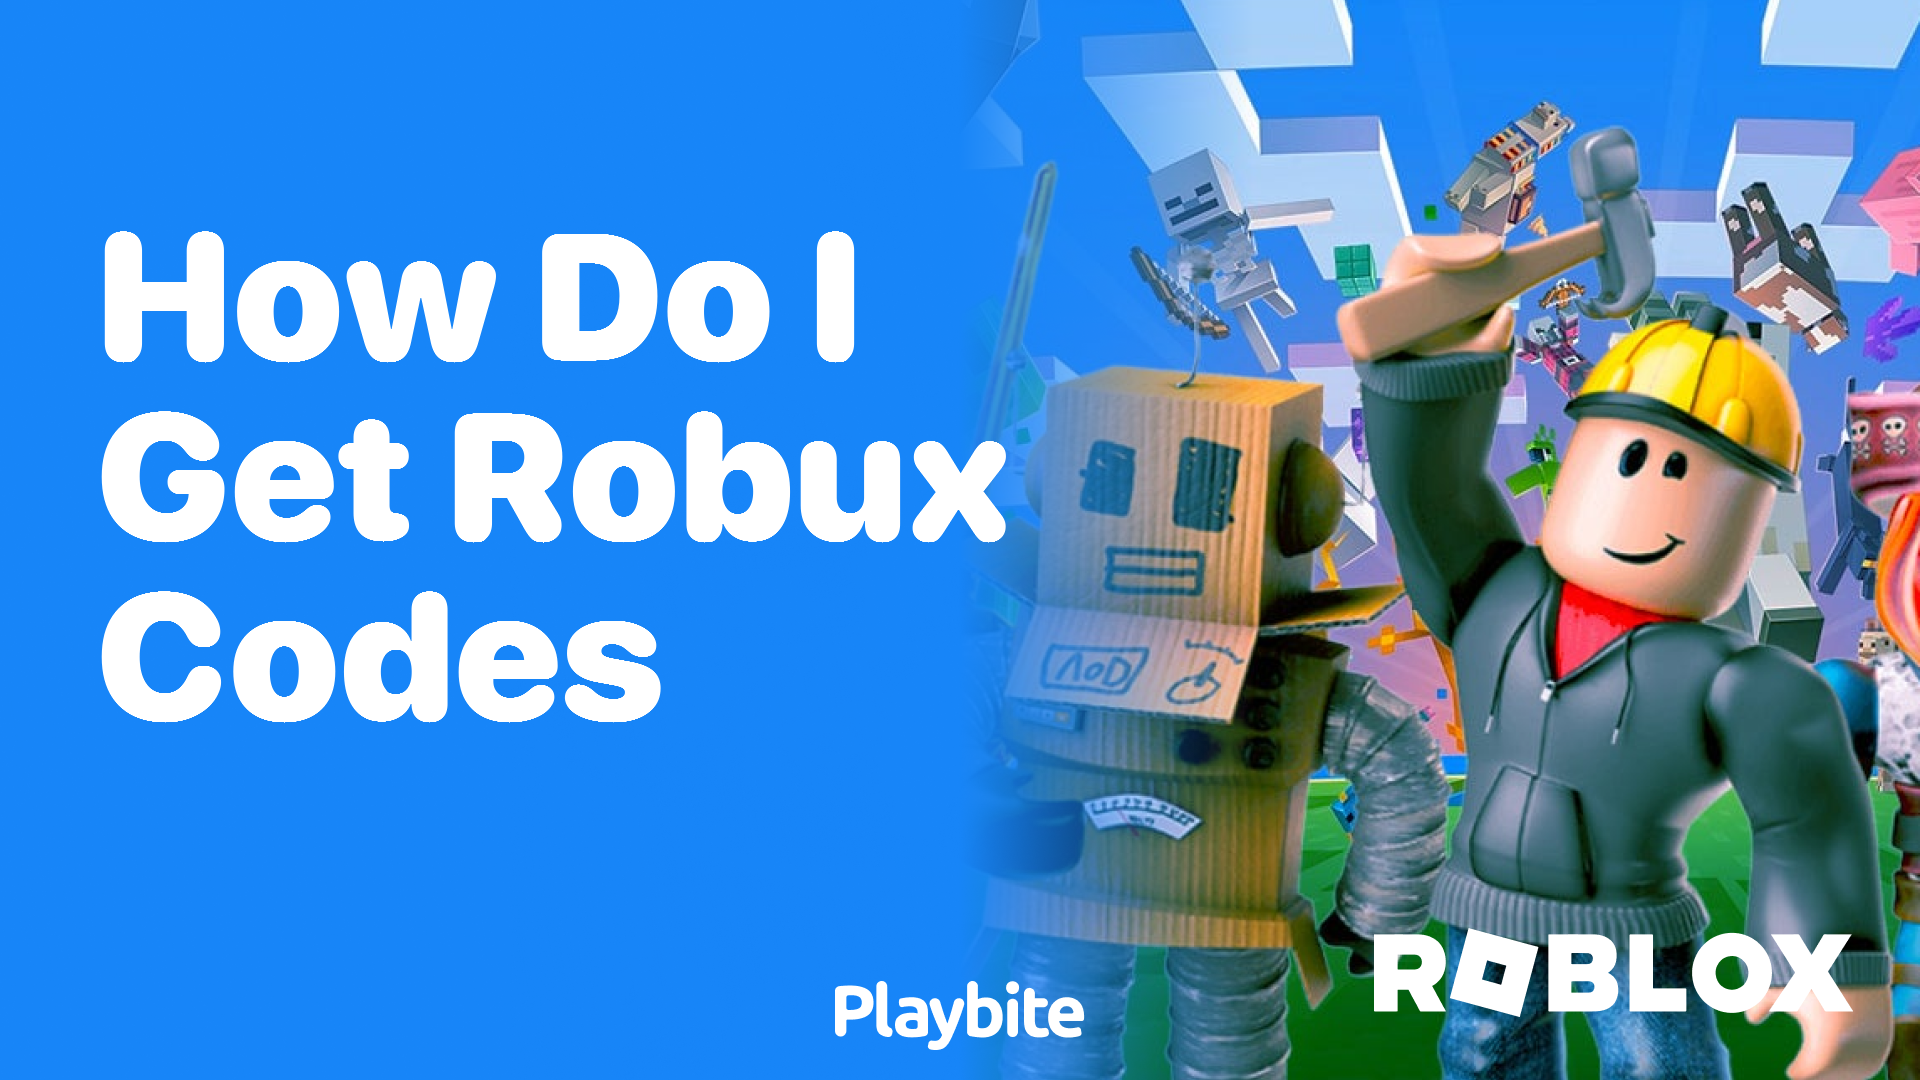 How Do I Get Robux Codes?